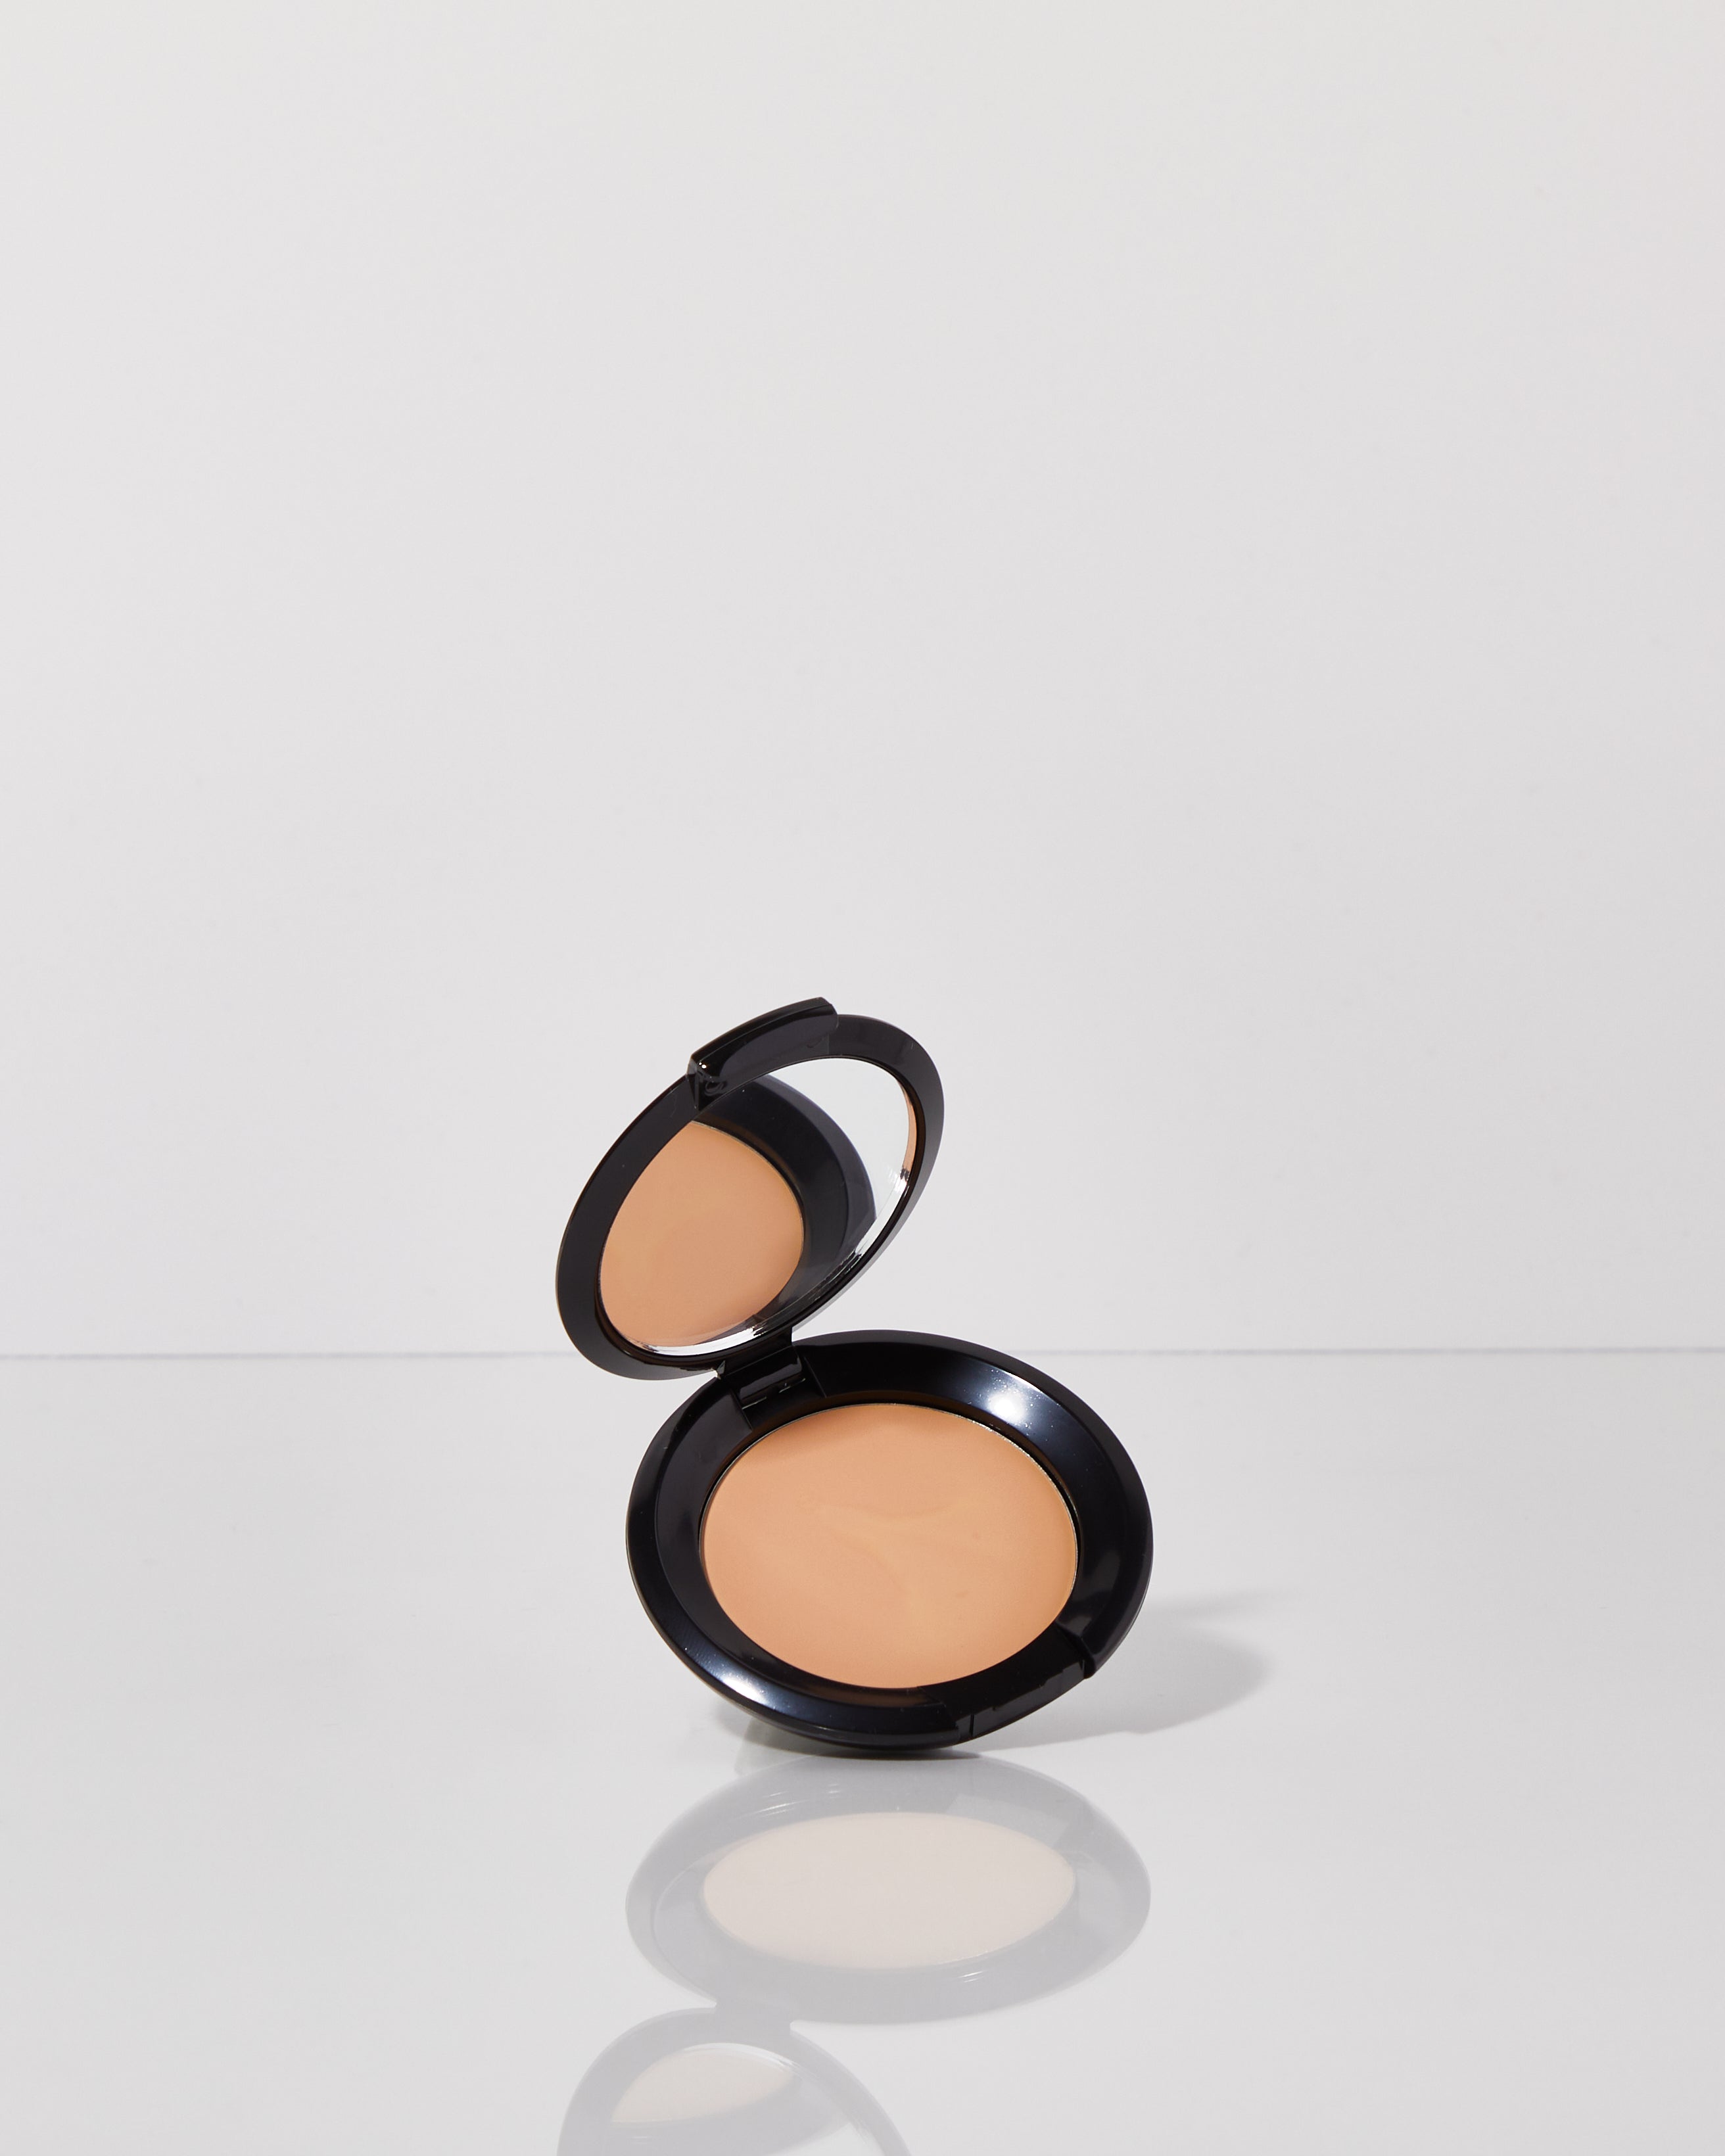 Beauties Lab Rituel de Fille The Ethereal Veil Foundation